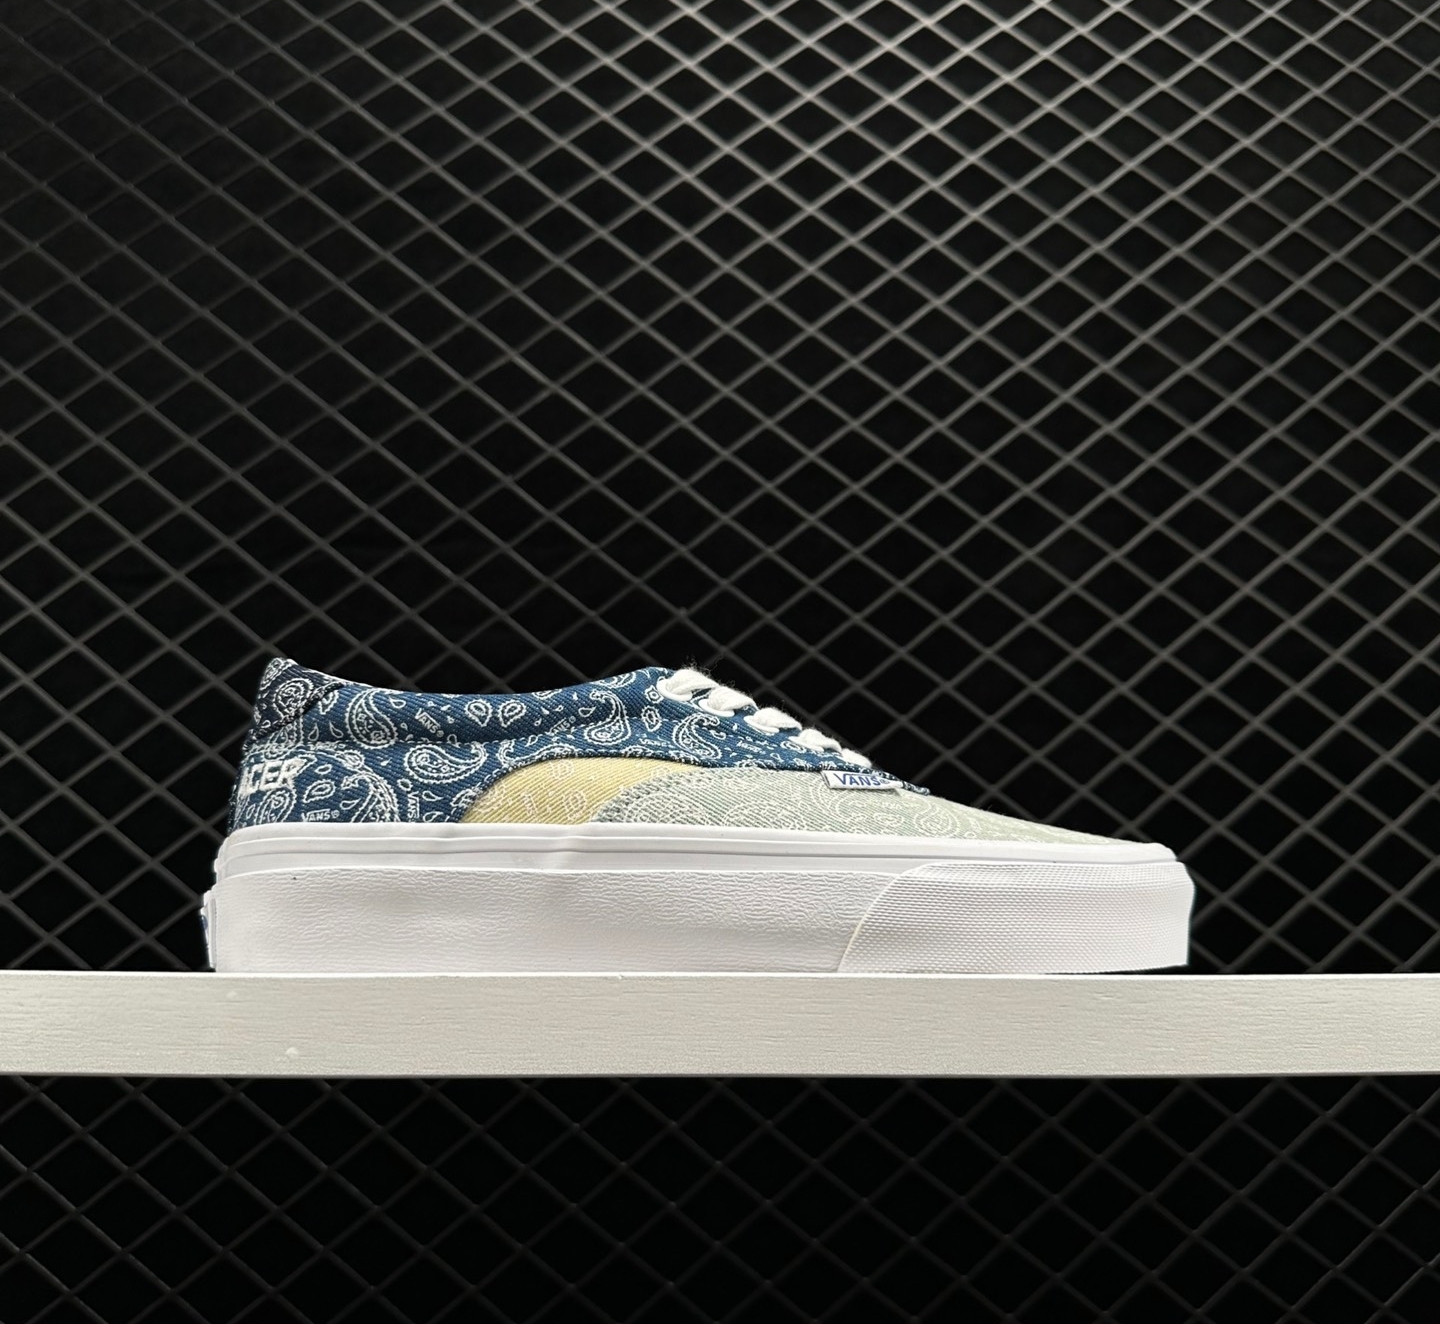 Vans Acer Ni SP 'Bandana - Multi' Blue White VN0A4UWYASN | Stylish and Comfy Sneakers